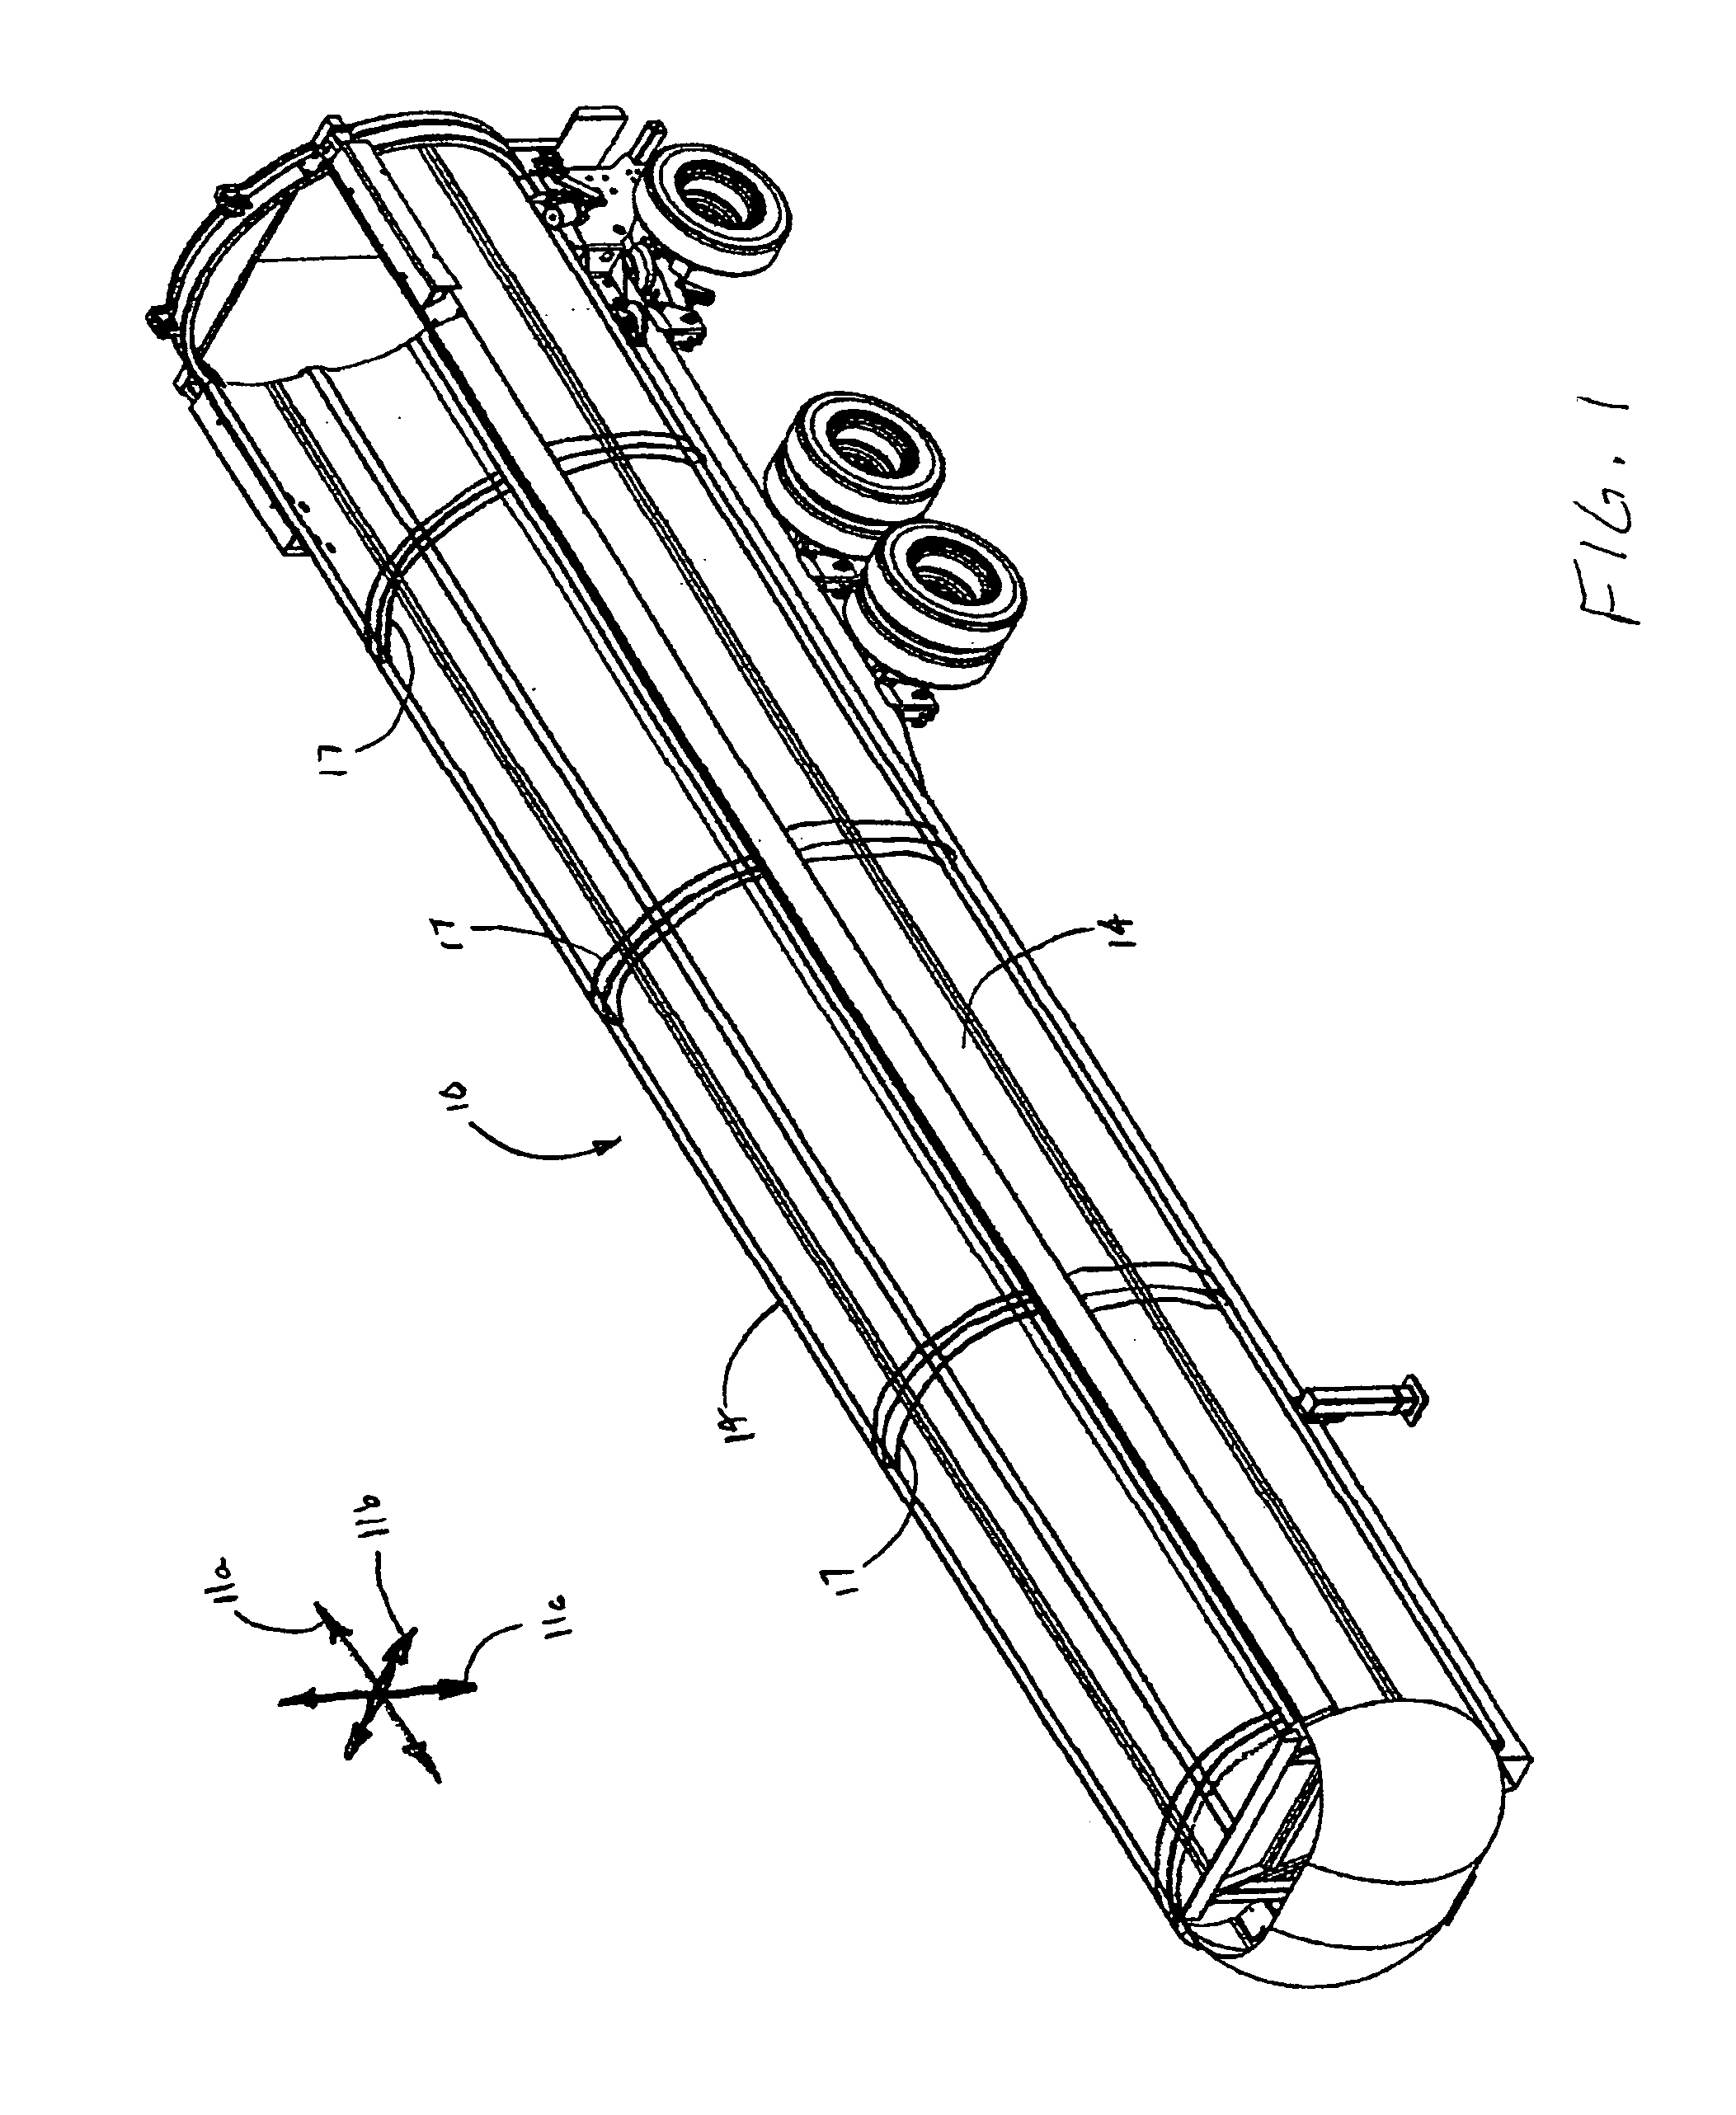 Material ejection system for a vehicle